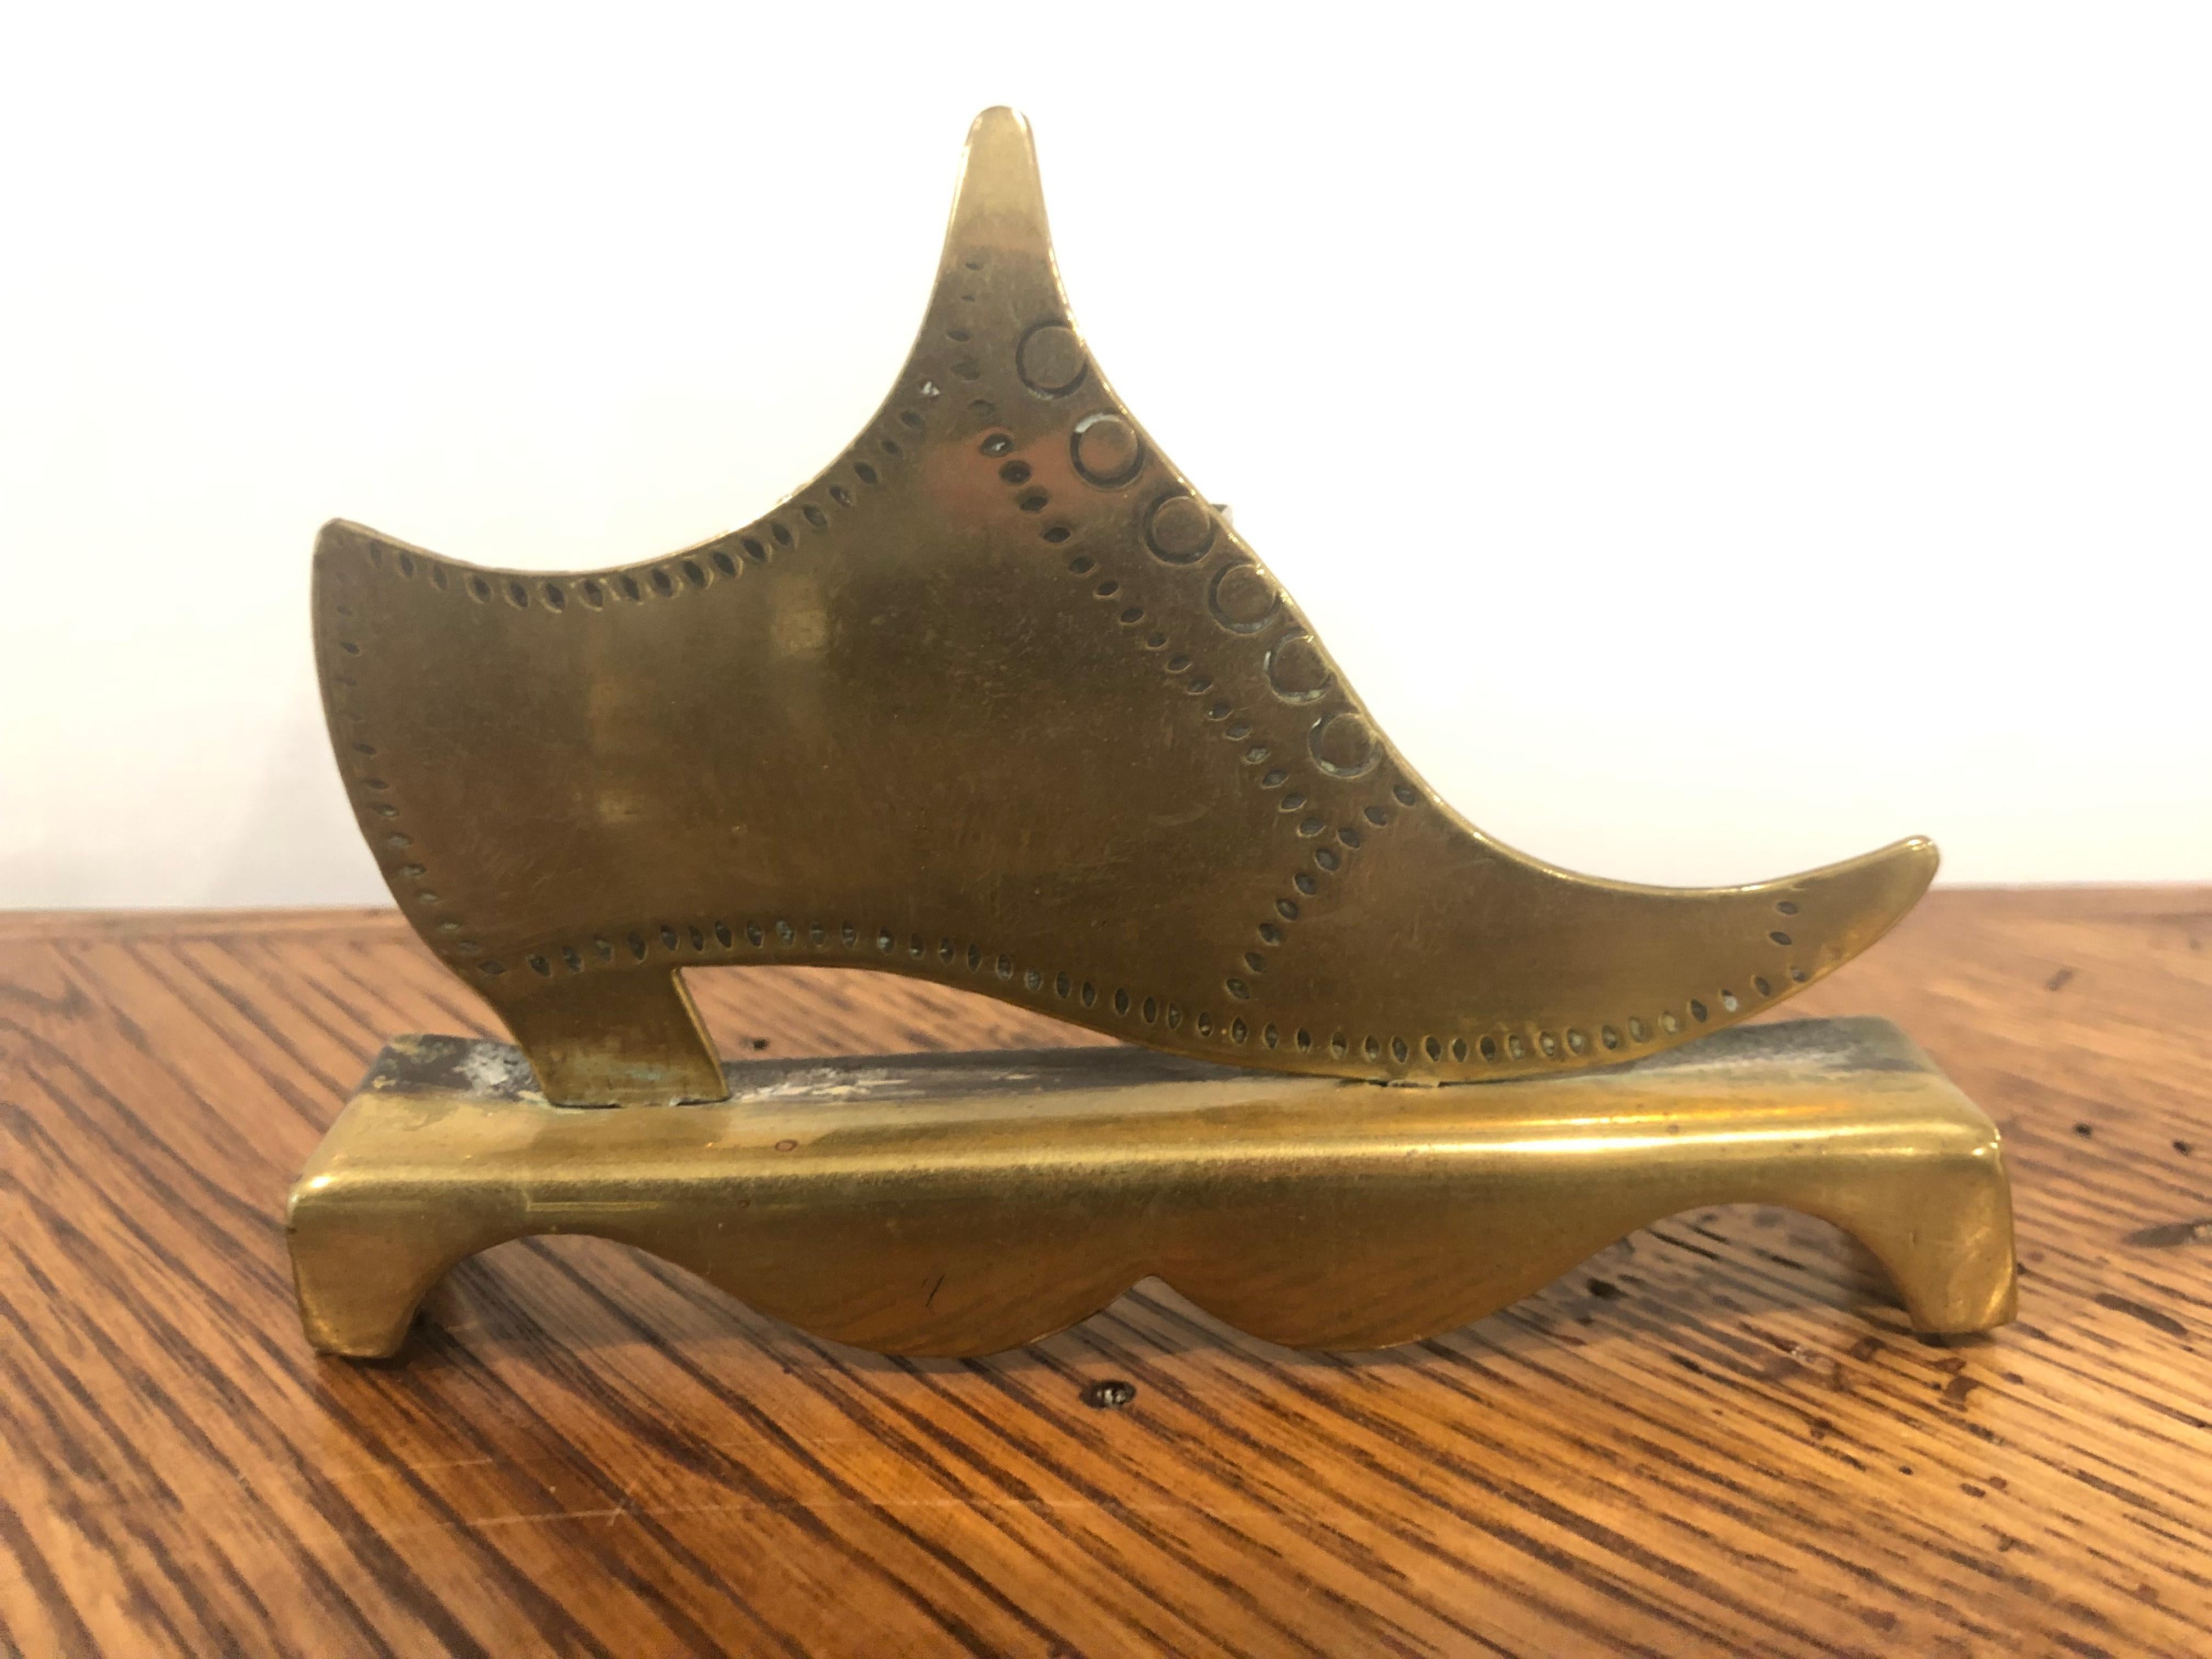 Late 19th century solid brass 1870 English single shoe spill vase with incised detail and a rear holder from a private collector who traveled the world buy and selling beautiful items.